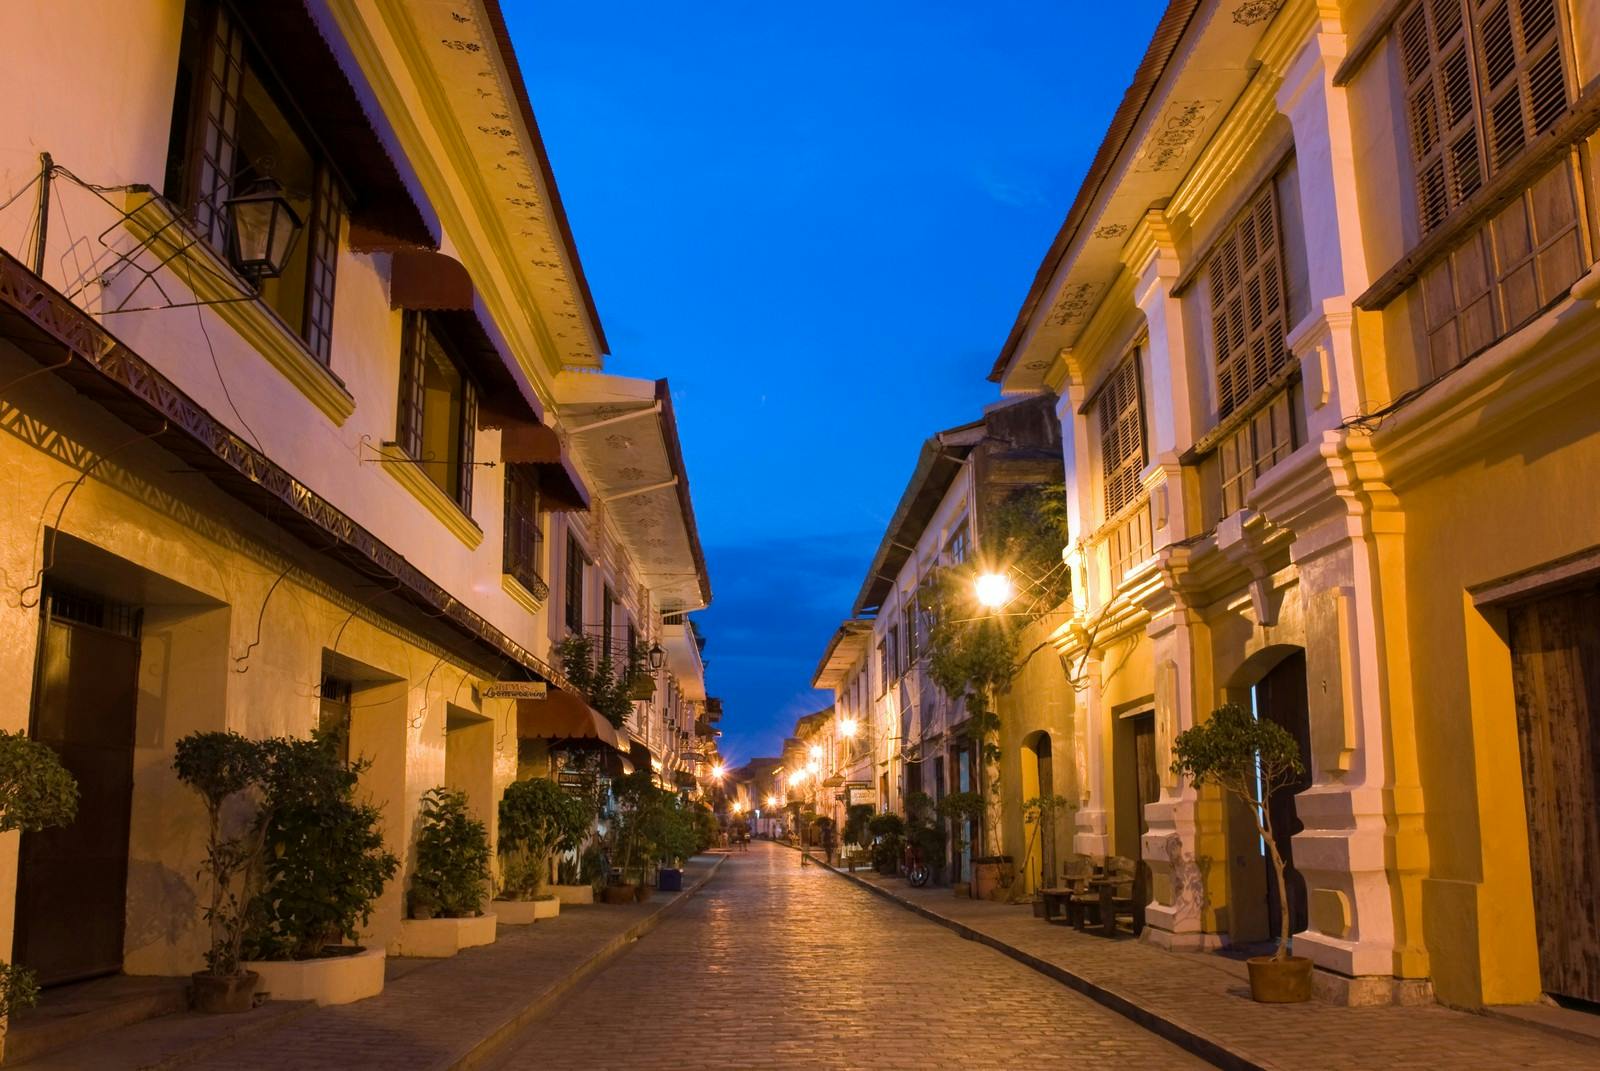 Lit up streets of Calle Crisologo at night